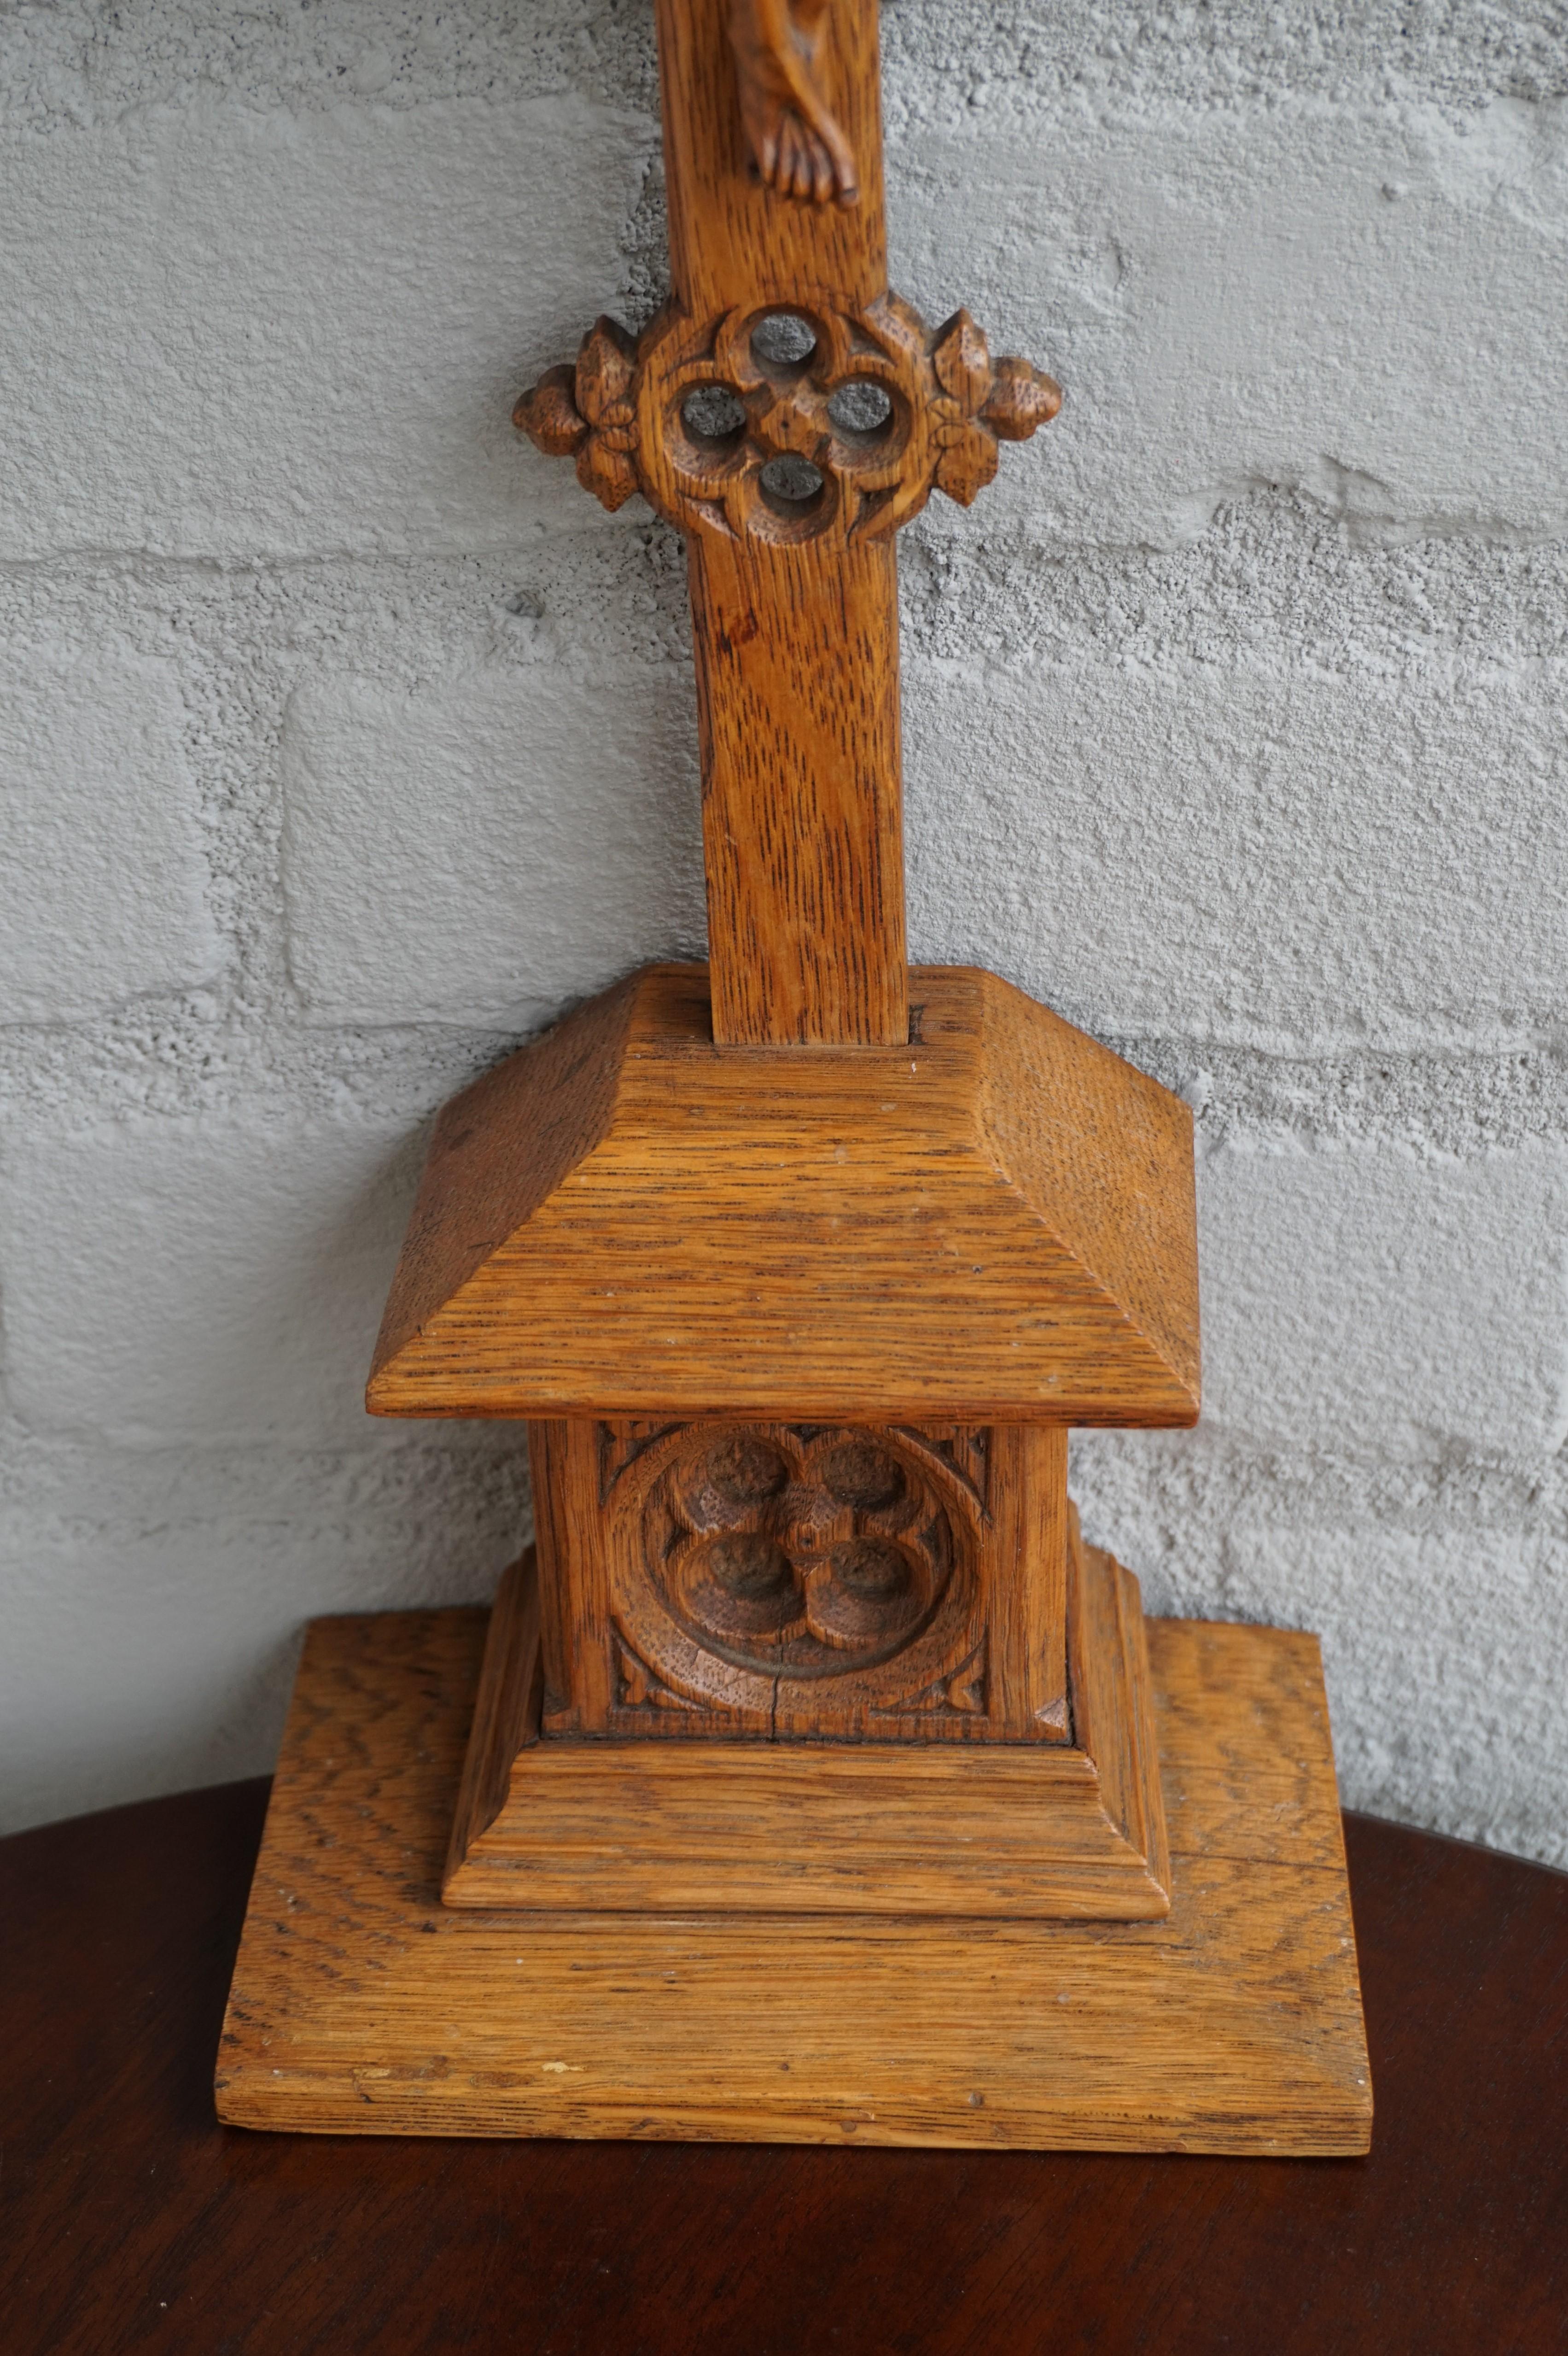 Early 1900s Hand Carved Gothic Revival Table Crucifix with Corpus of Christ 1910 6